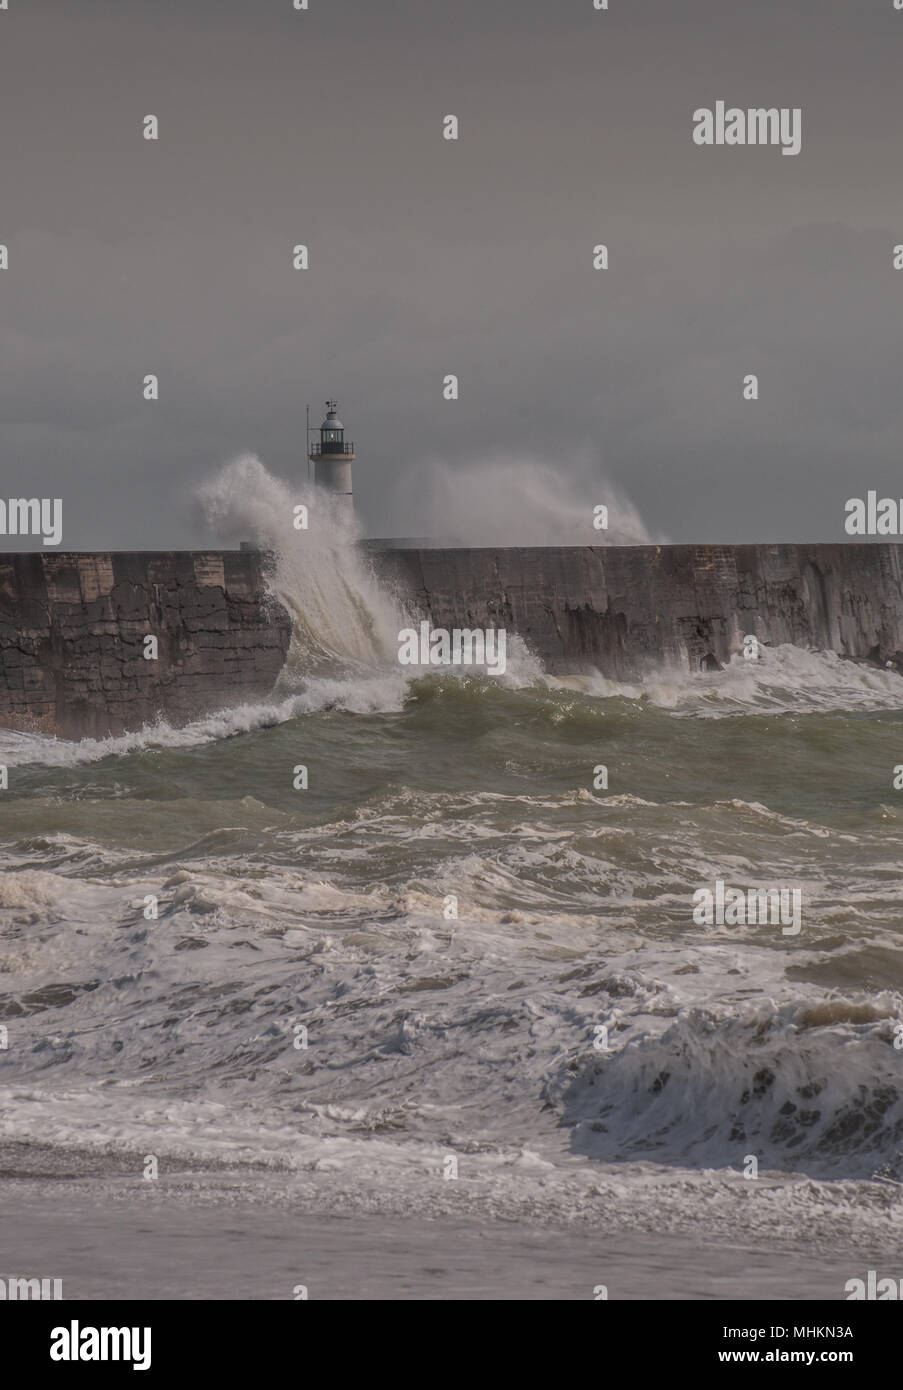 Newhaven, East Sussex, UK..2 May 2018. UK Weather:Brighter later in the day after dark clouds & rain, strong wind whips up the surf at the harbour West break water before finally abating.. Stock Photo